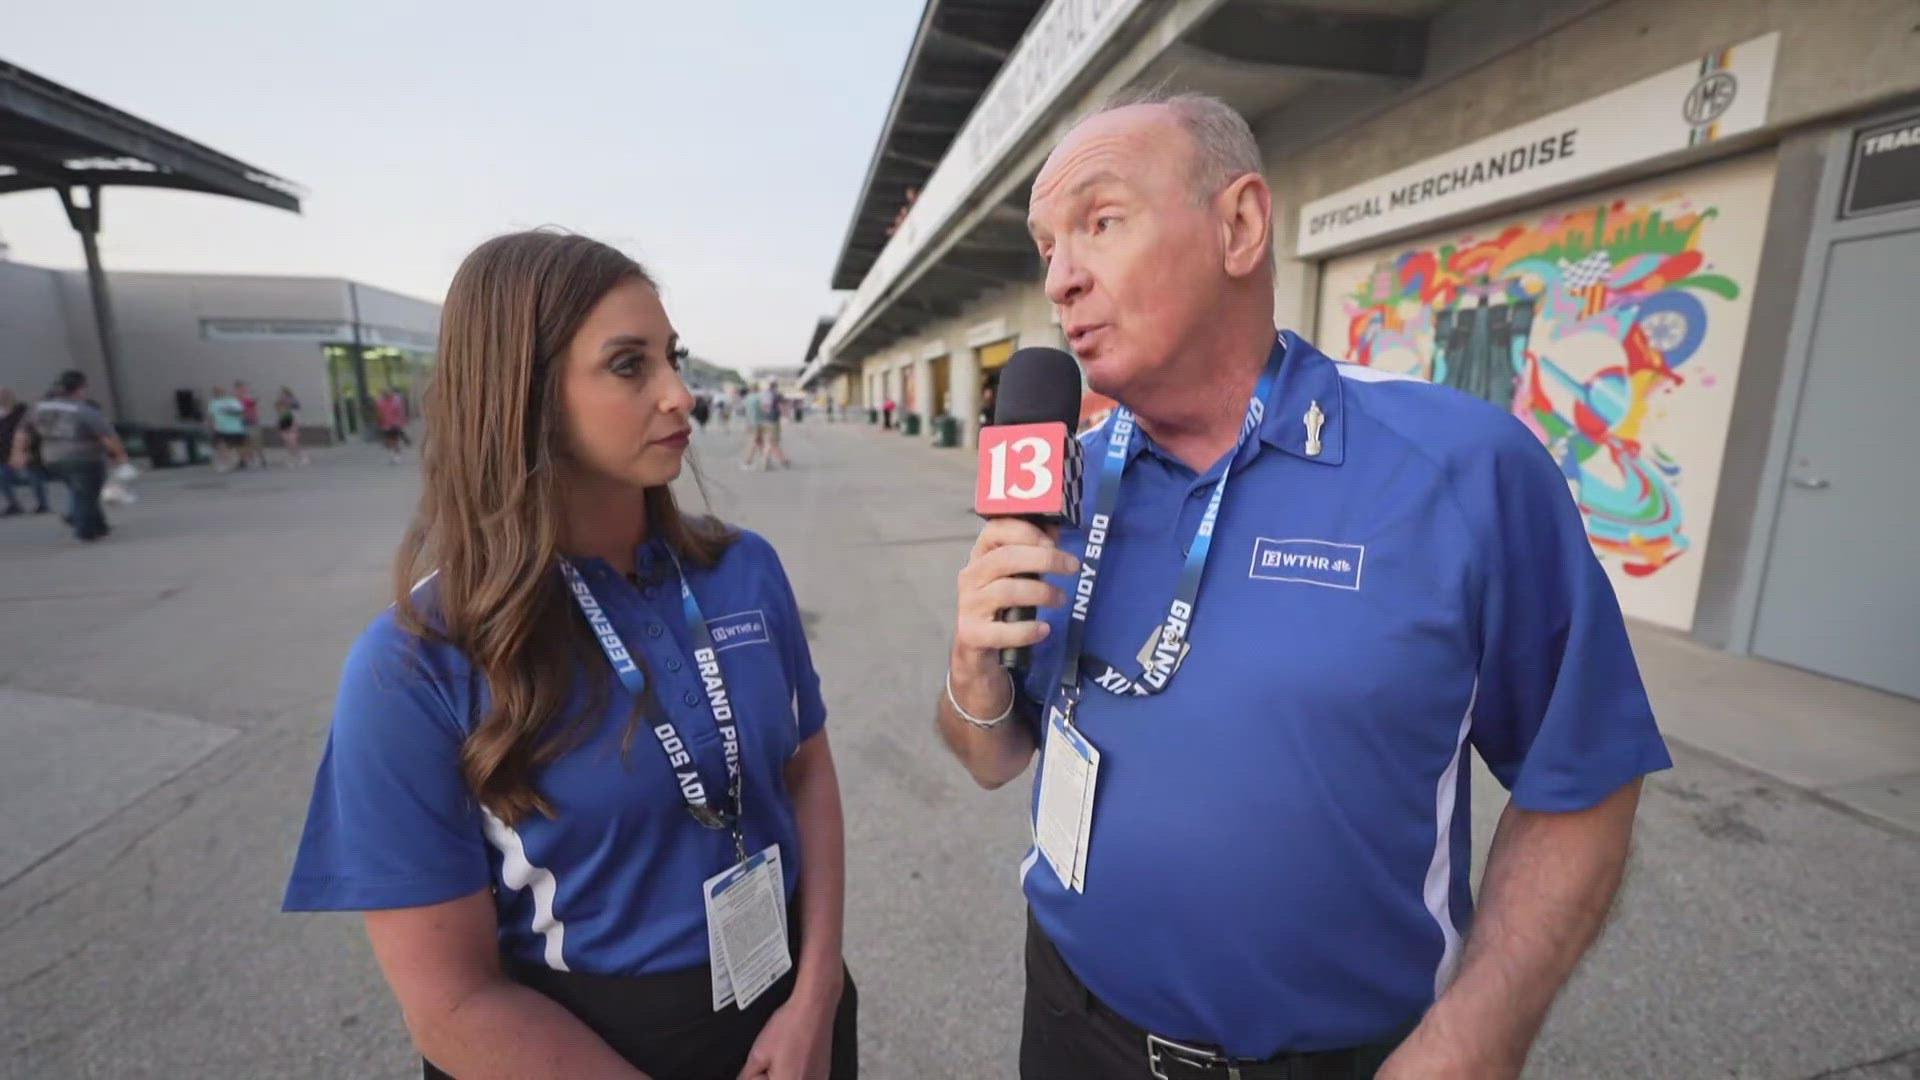 Chuck Lofton and Lindsey Monroe are at Gasoline Alley and they break down the IMS weather plan and what fans need to know.